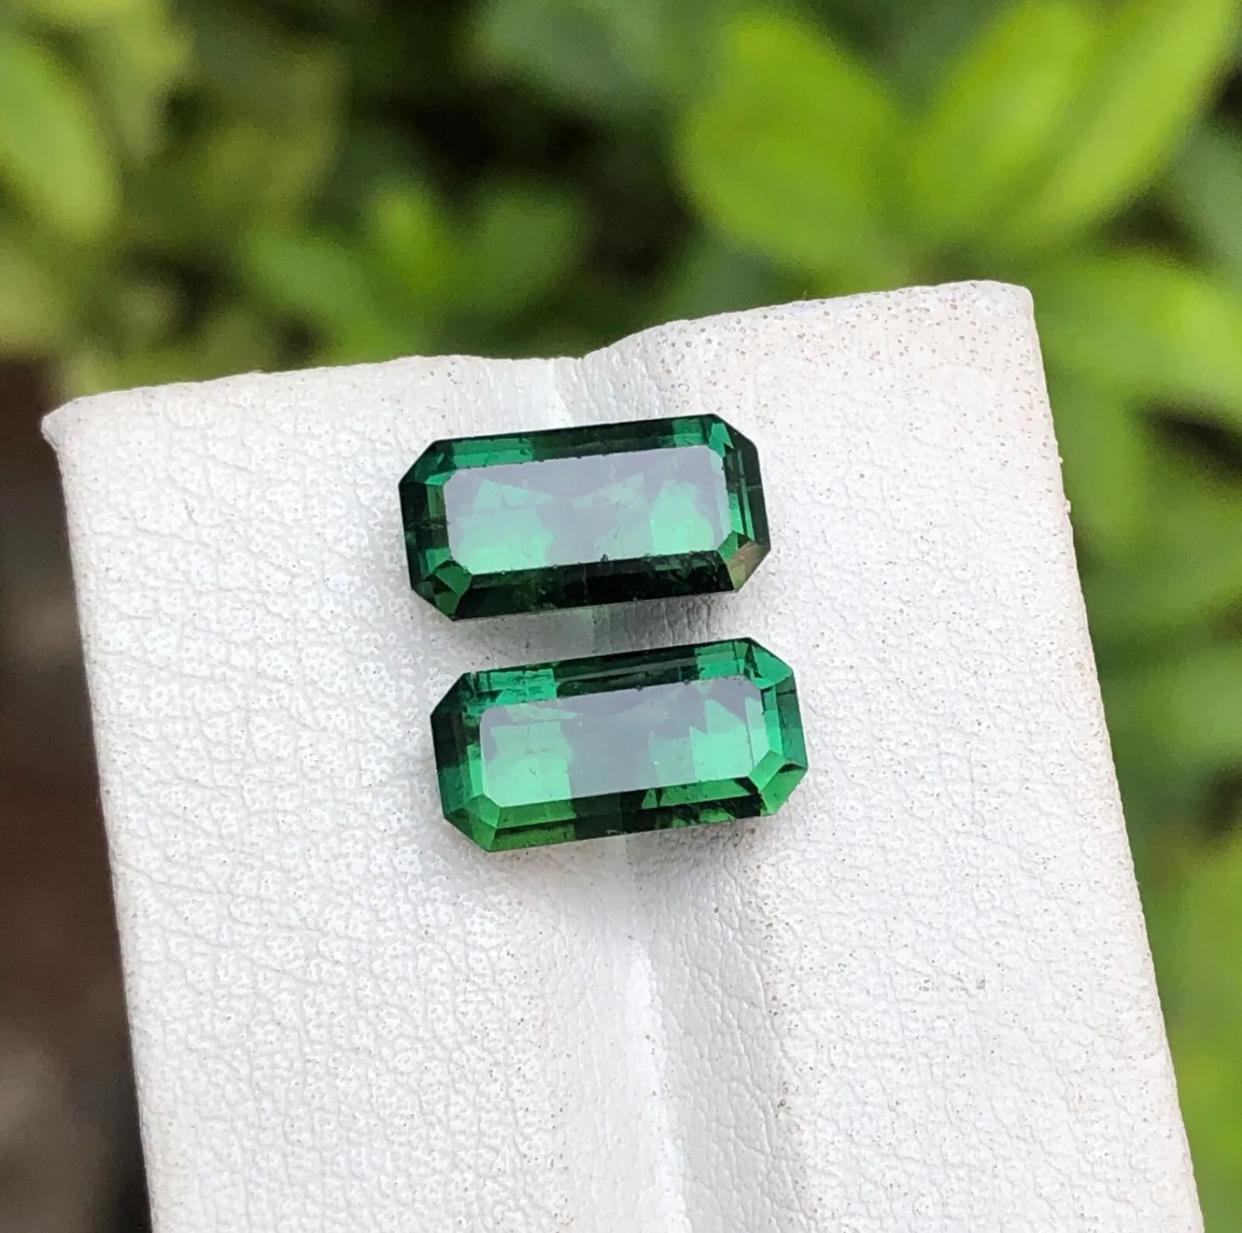 Remarkable Green Emerald Cut Natural Tourmaline Loose Gemstones from Afghanistan! These Emerald Cut gemstones are a celebration of elegance and sophistication, a perfect adornment for a precious lady or gentleman. Worth priceless